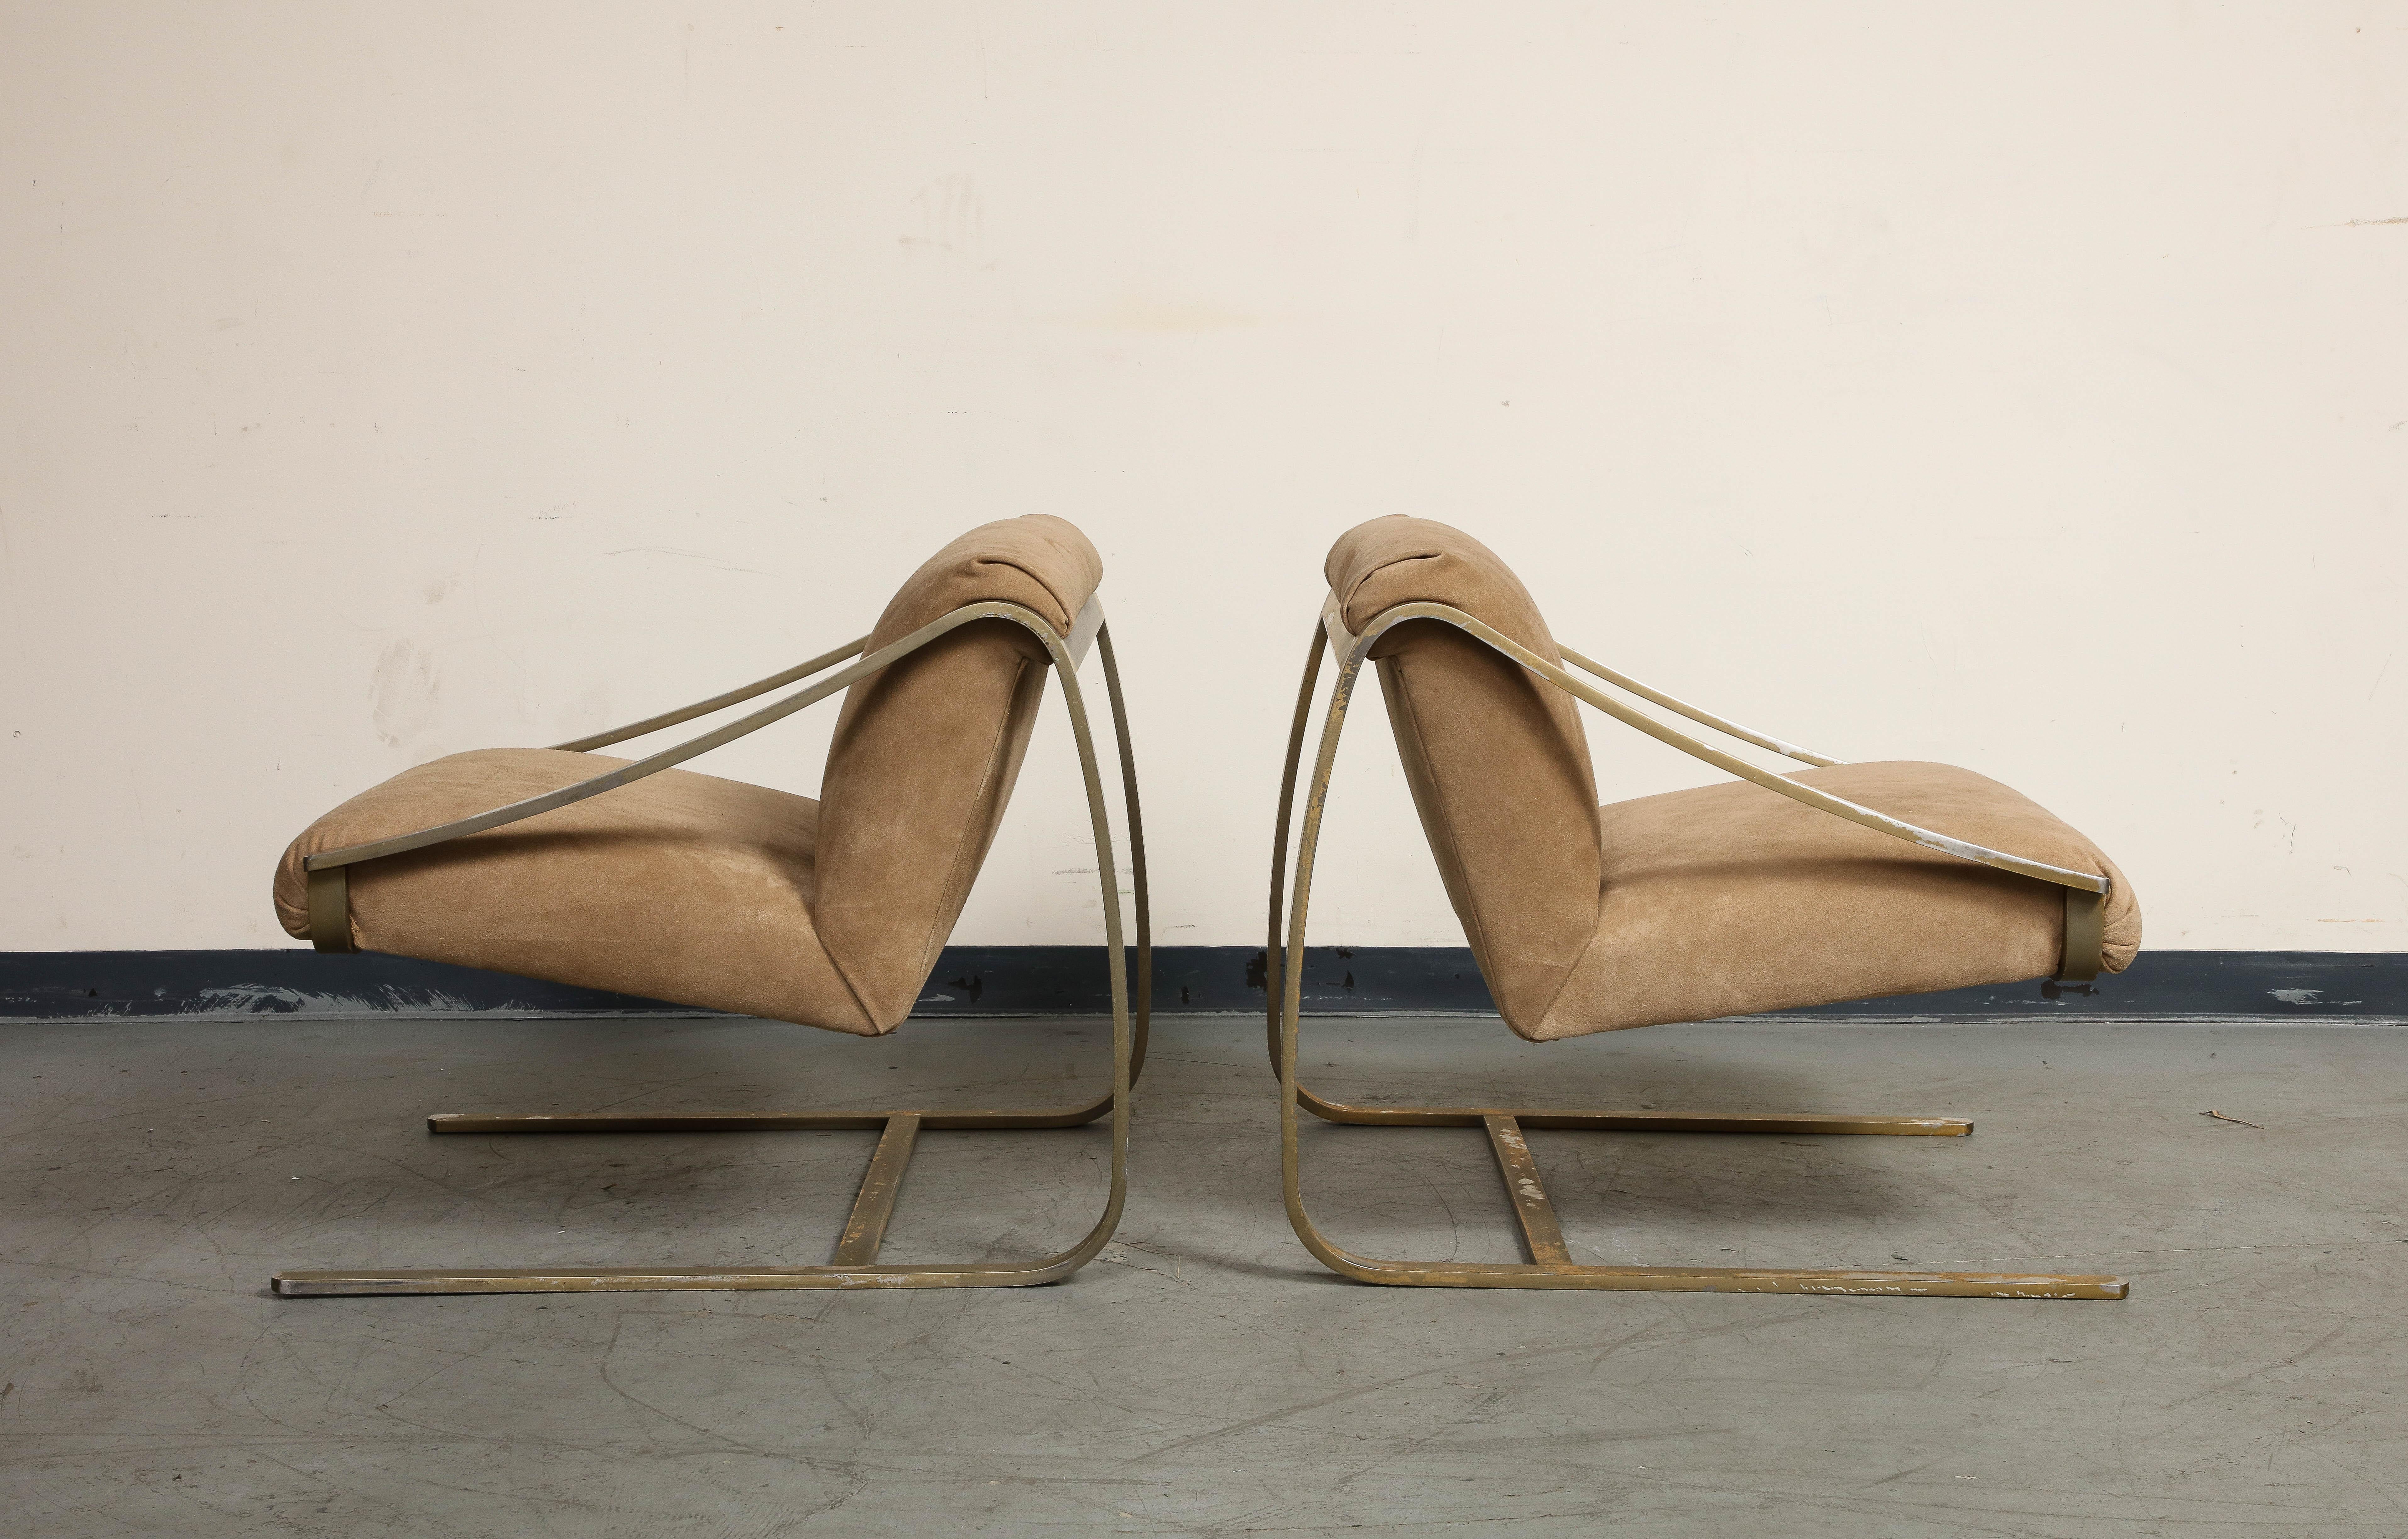 Pair of Bronze and Suede Modernist Lounge Chairs, circa 1965 For Sale 2